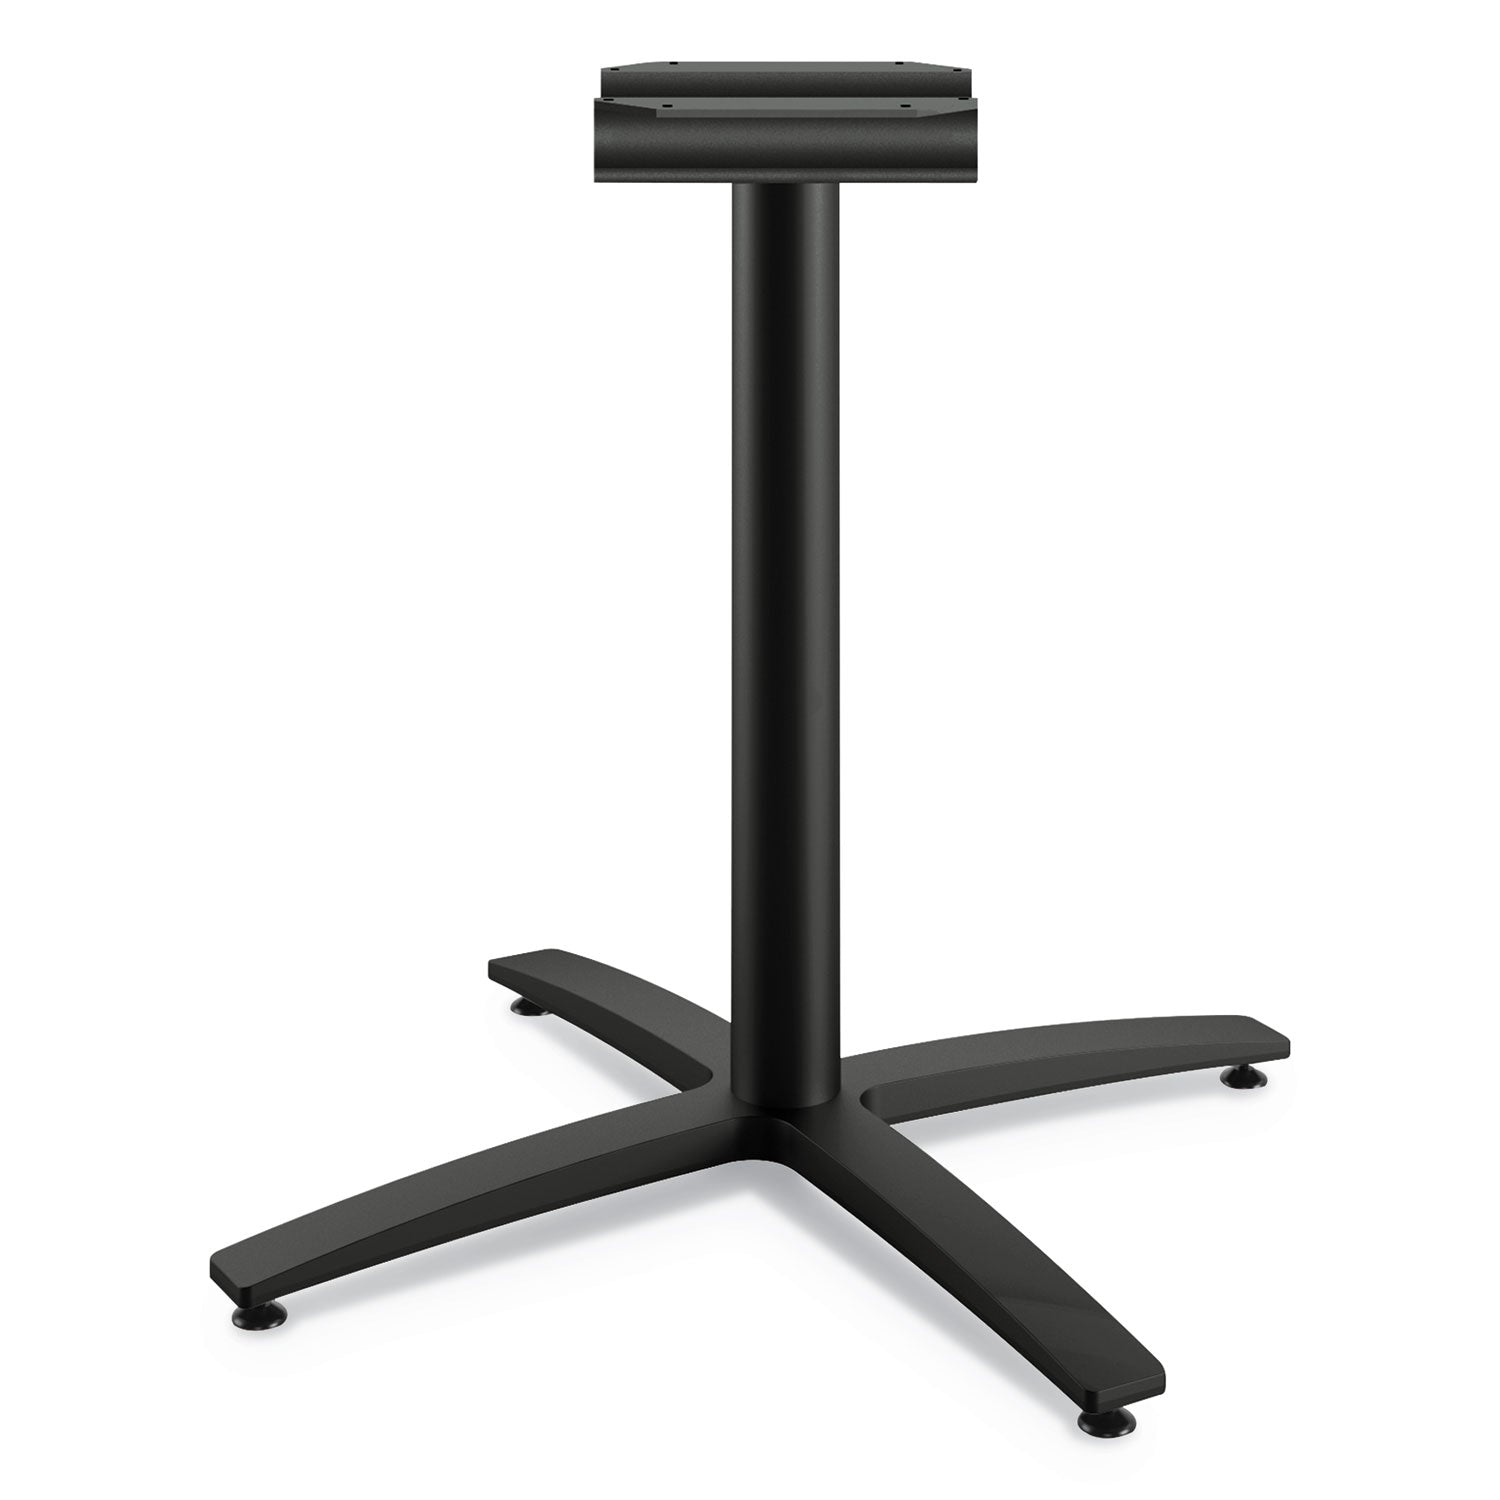 between-seated-height-x-base-for-42-table-tops-3268w-x-2957h-black_honbtx30lcbk - 1